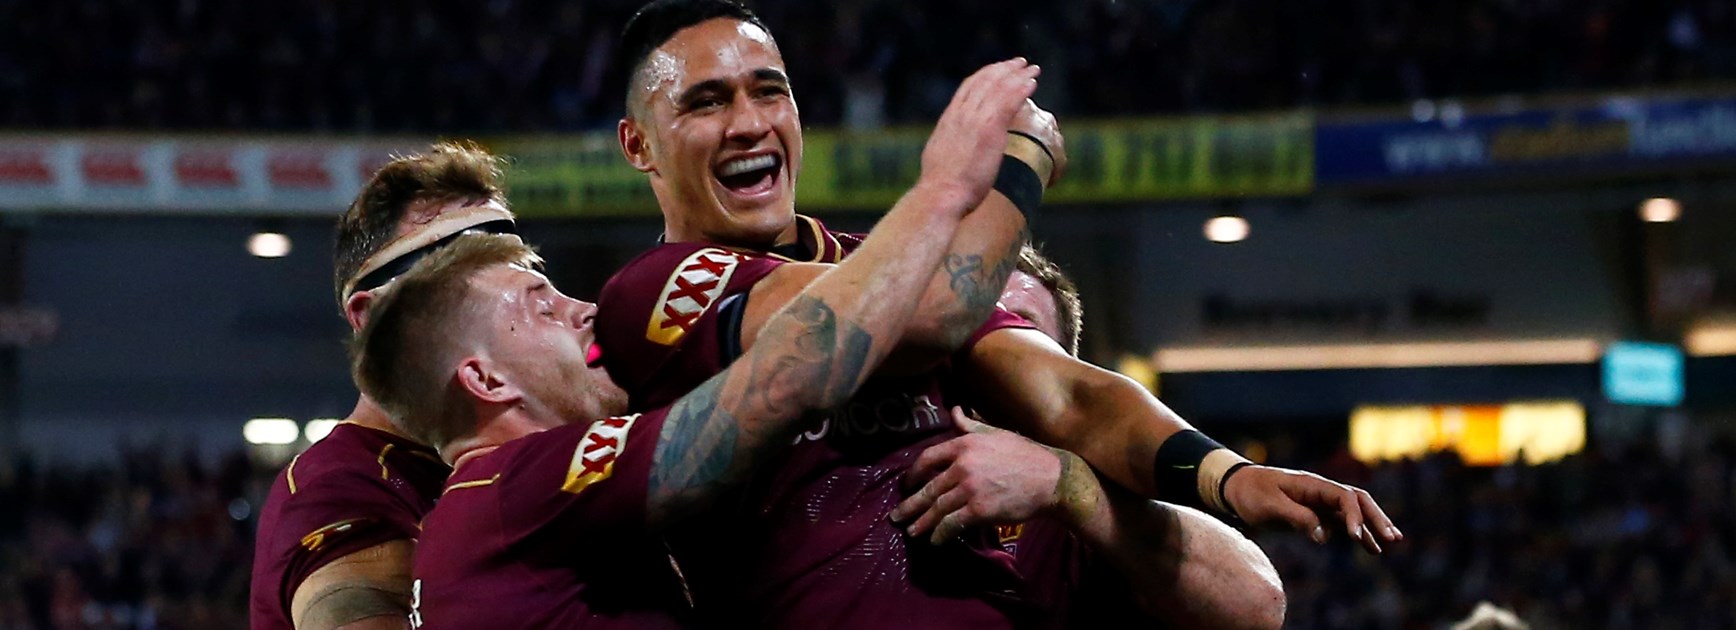 Ranking the Maroons backs candidates for Origin